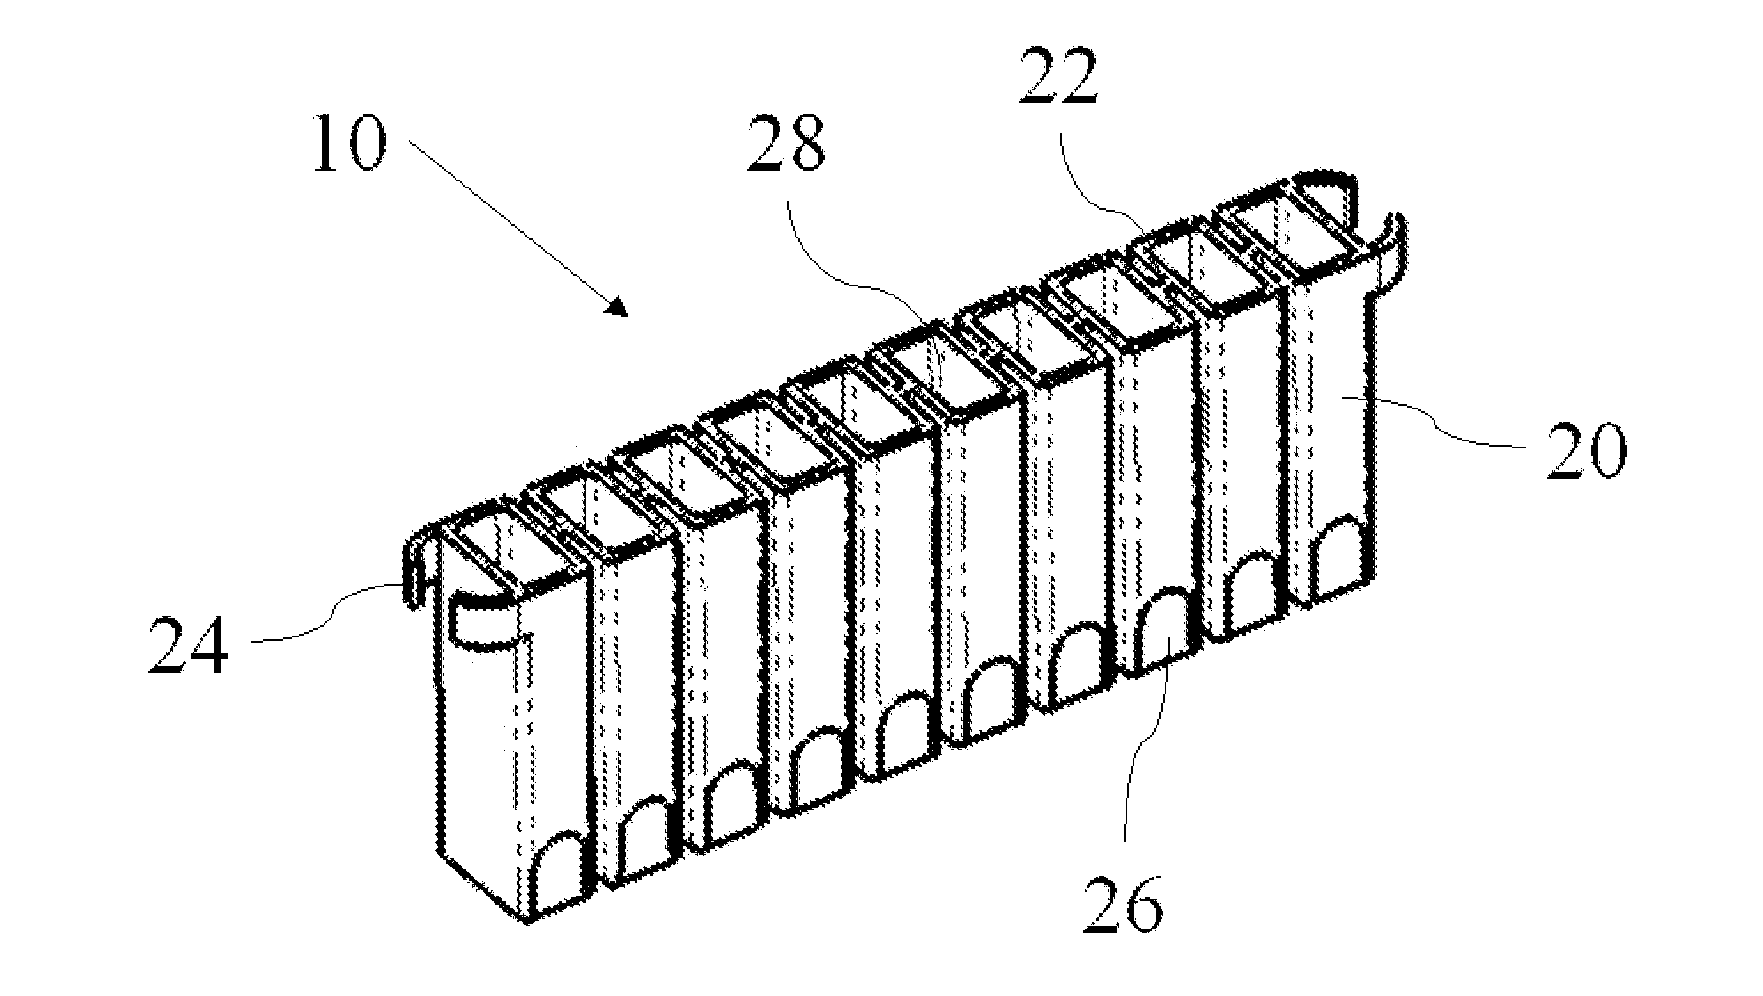 Reaction vessel and method for the handling thereof